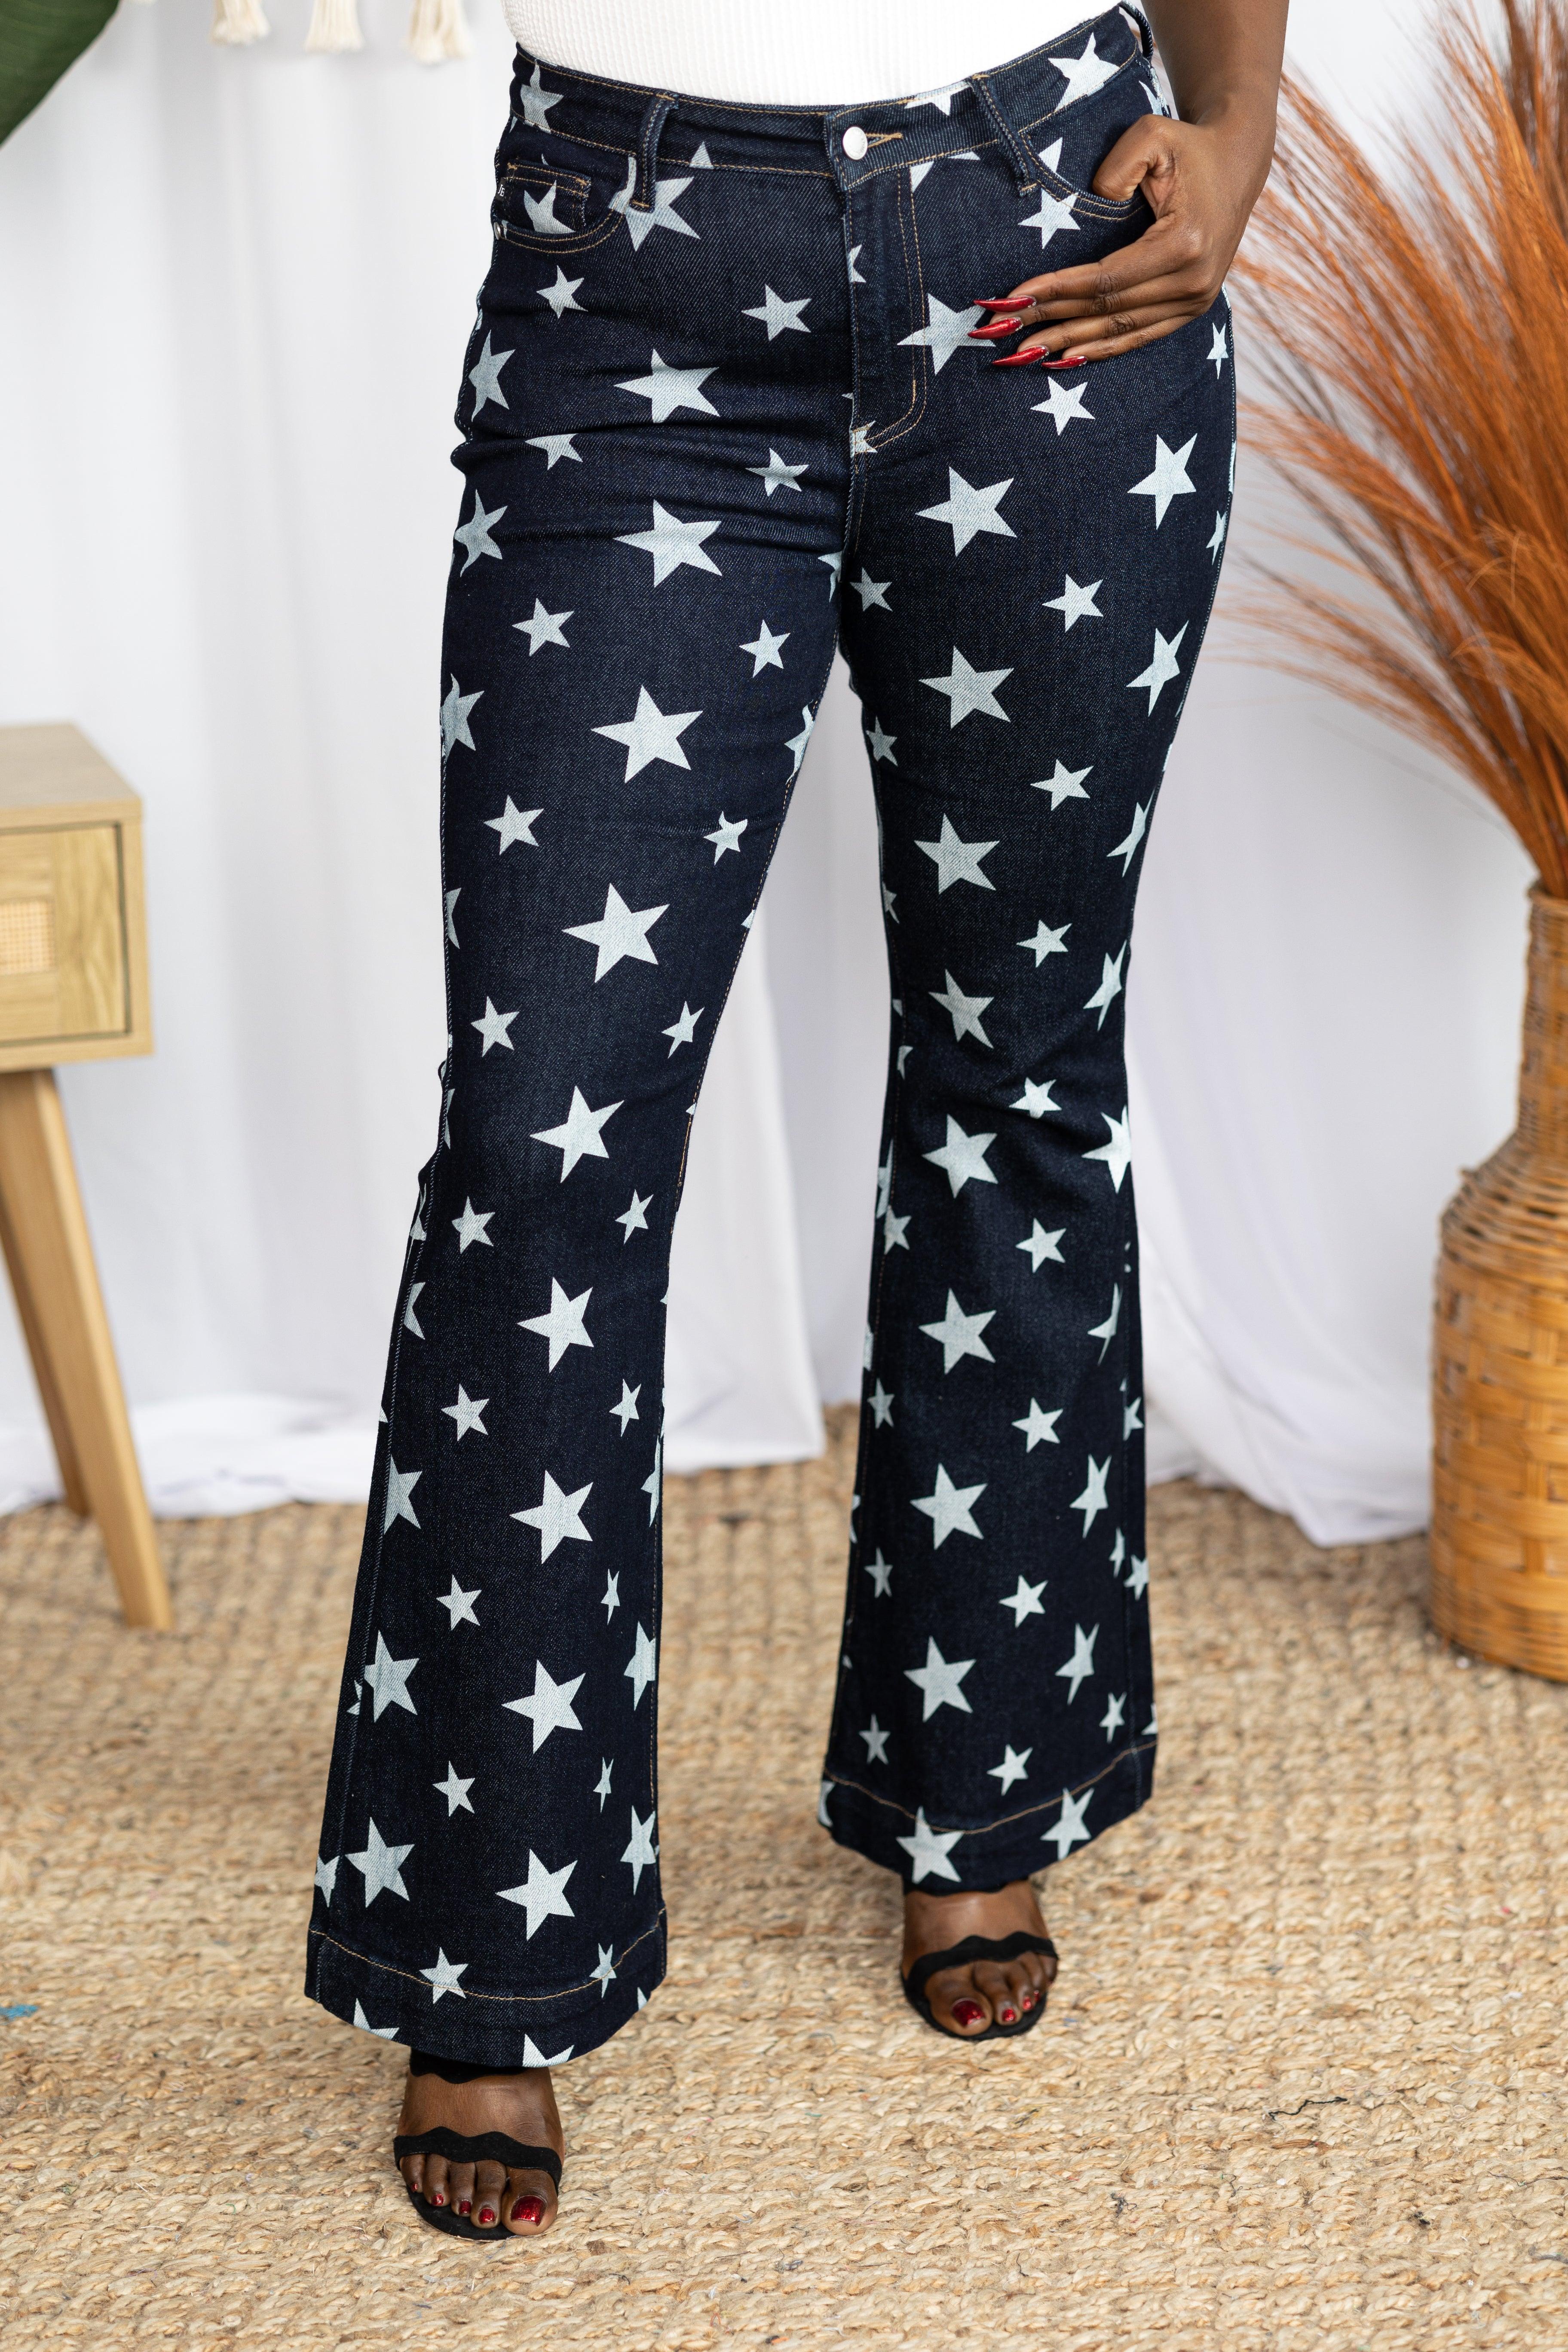 Freedom Stars - Judy Blue Giftmas Boutique Simplified   